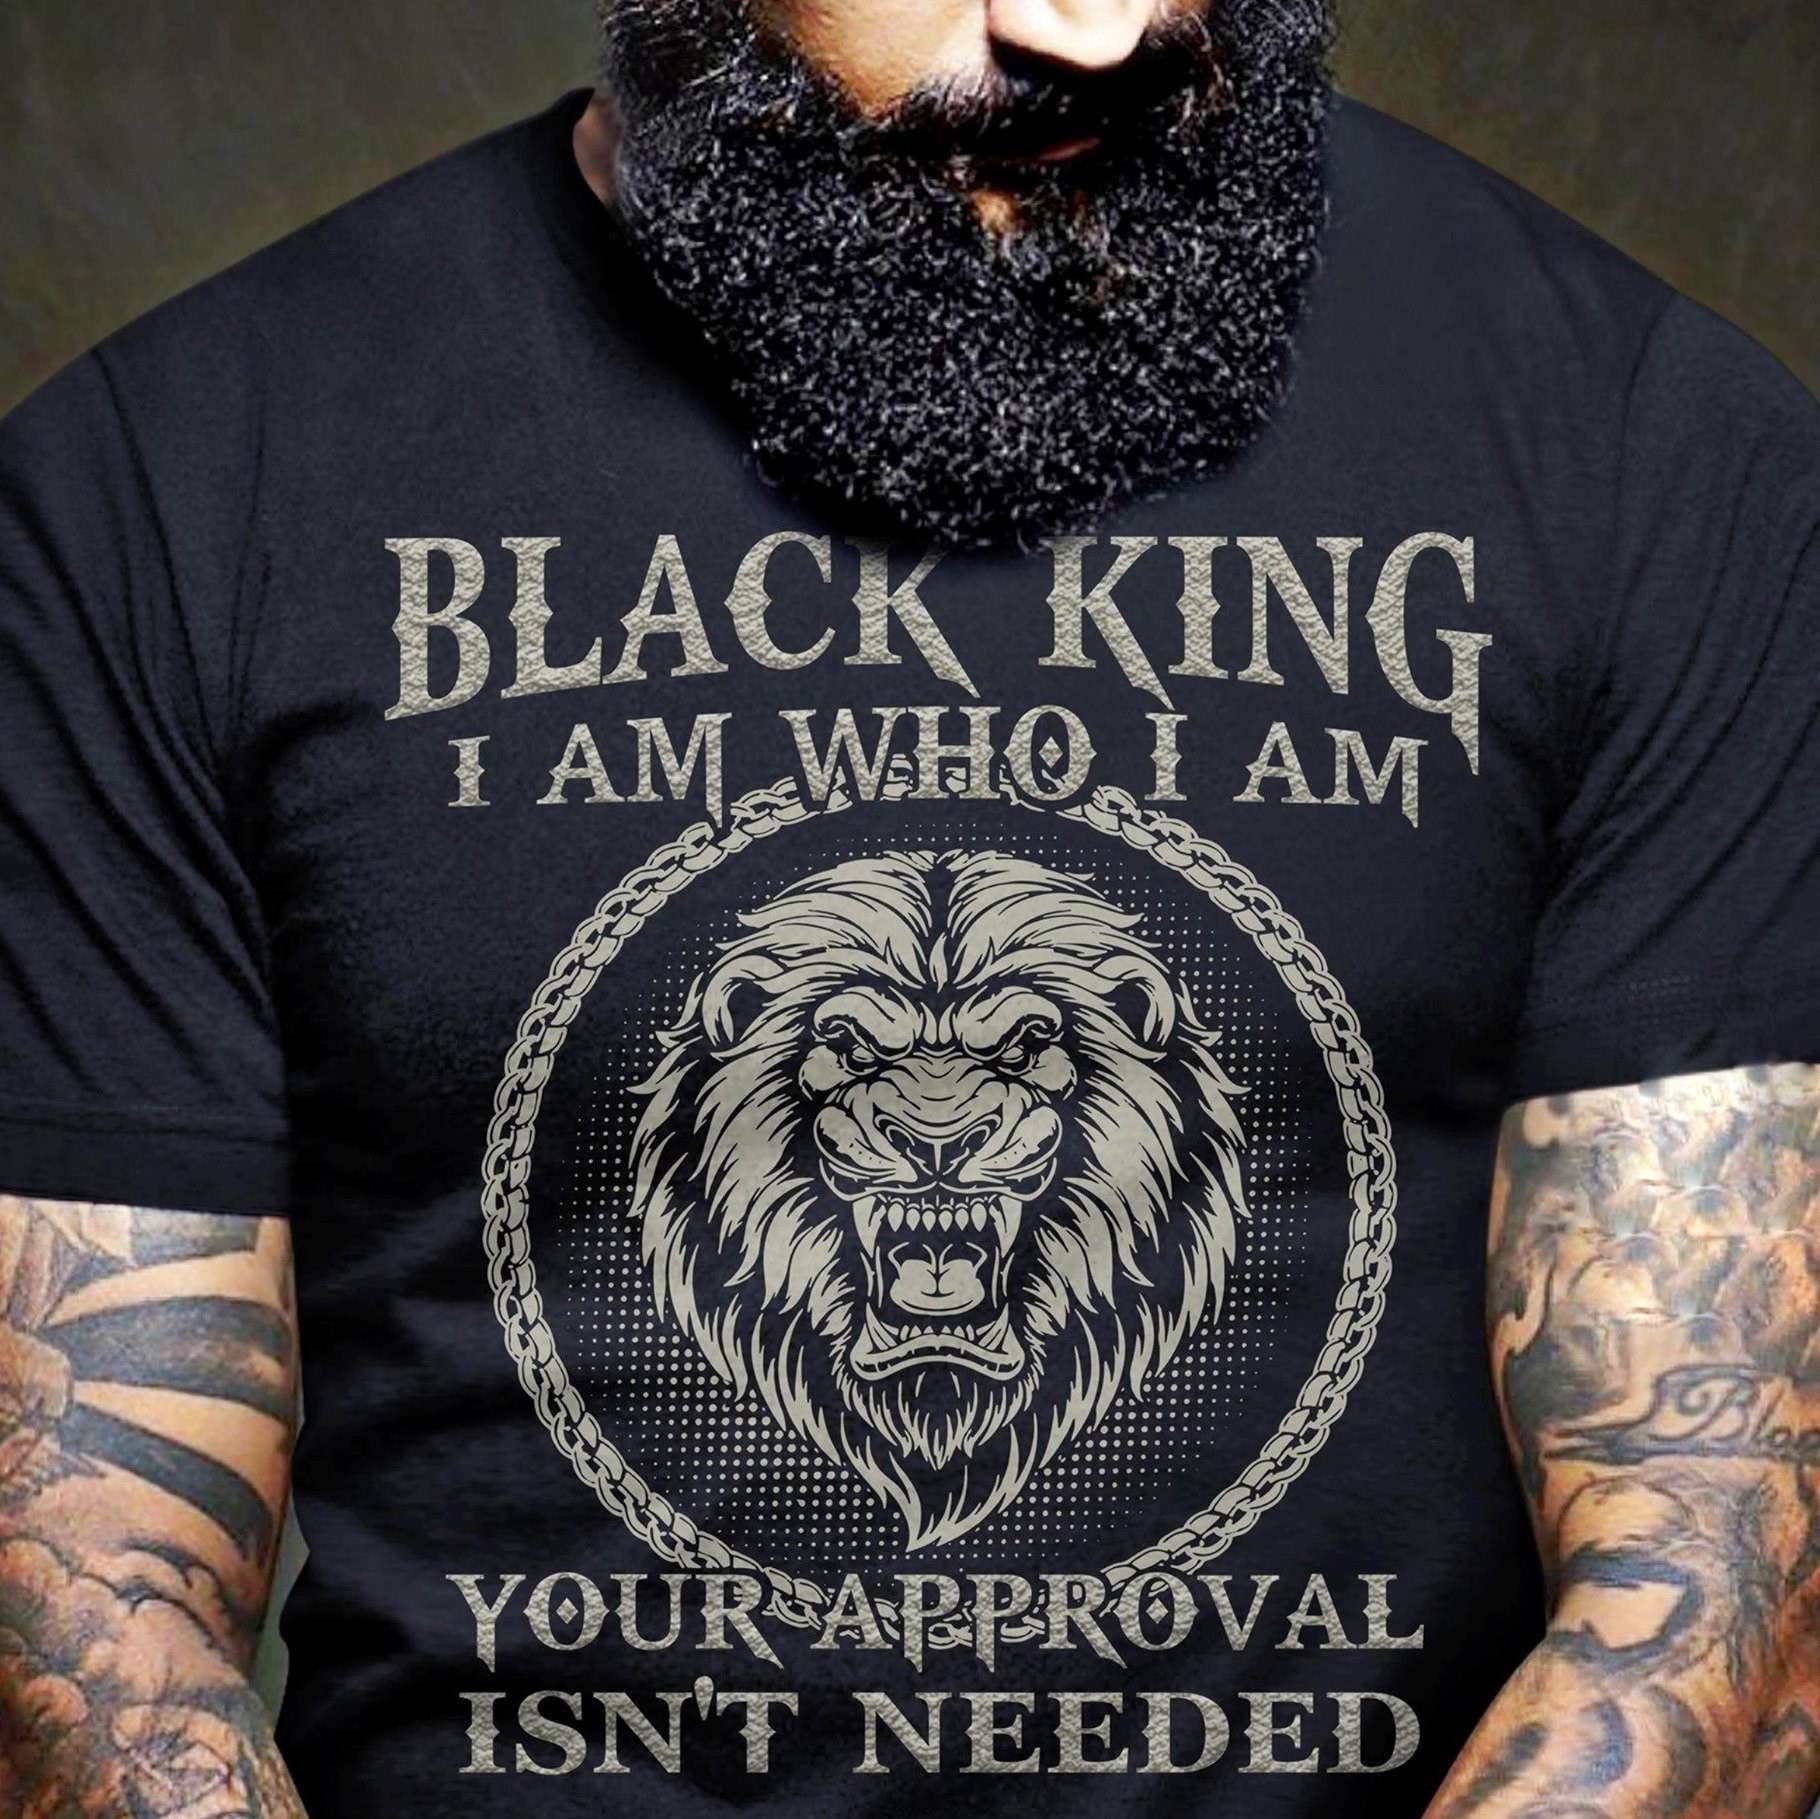 Black Lion King - Black king i am who i am your approval isn't needed